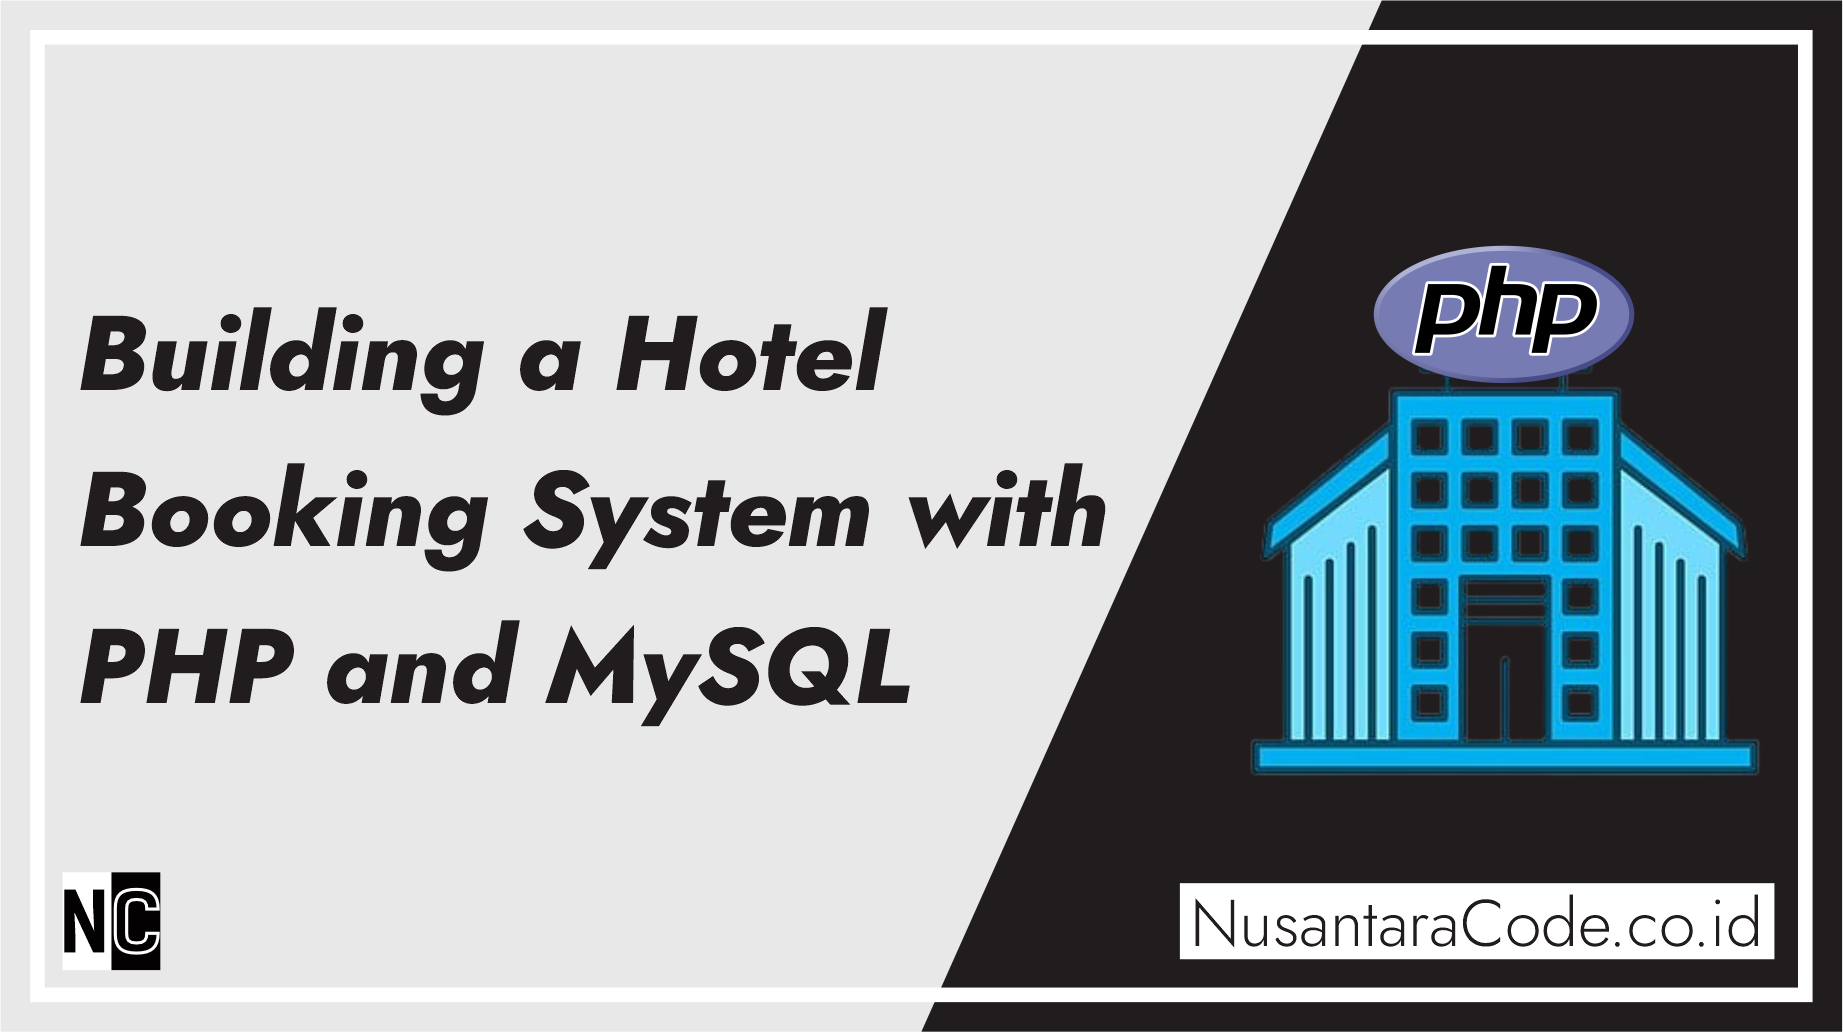 Building a Hotel Booking System with PHP and MySQL